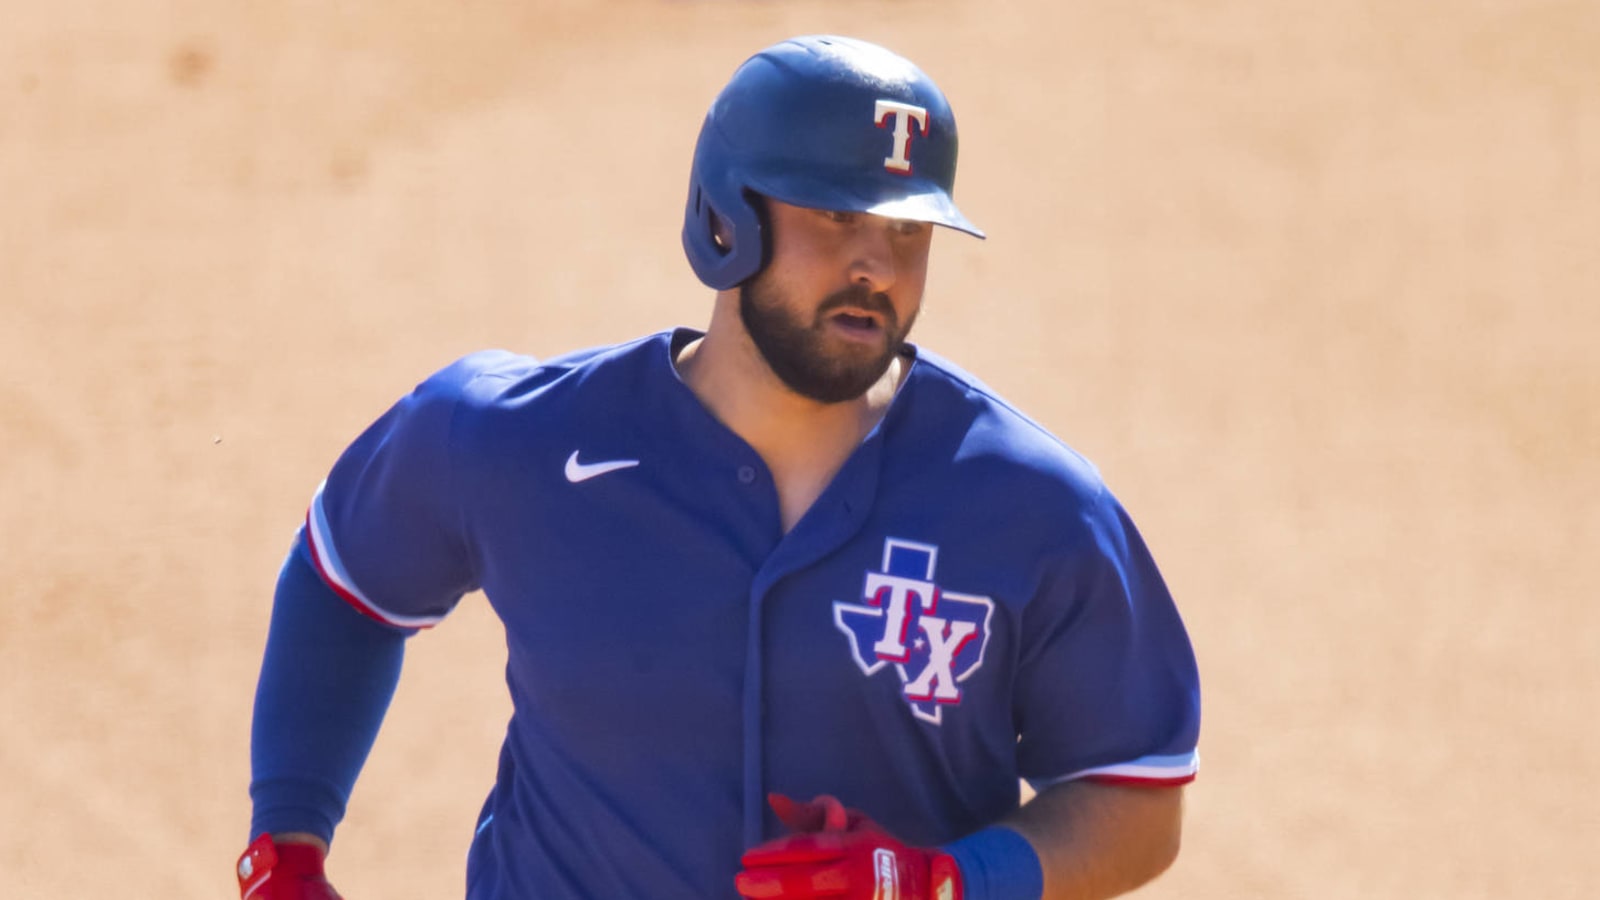 Rangers' Joey Gallo took Greg Maddux’s daughter to prom